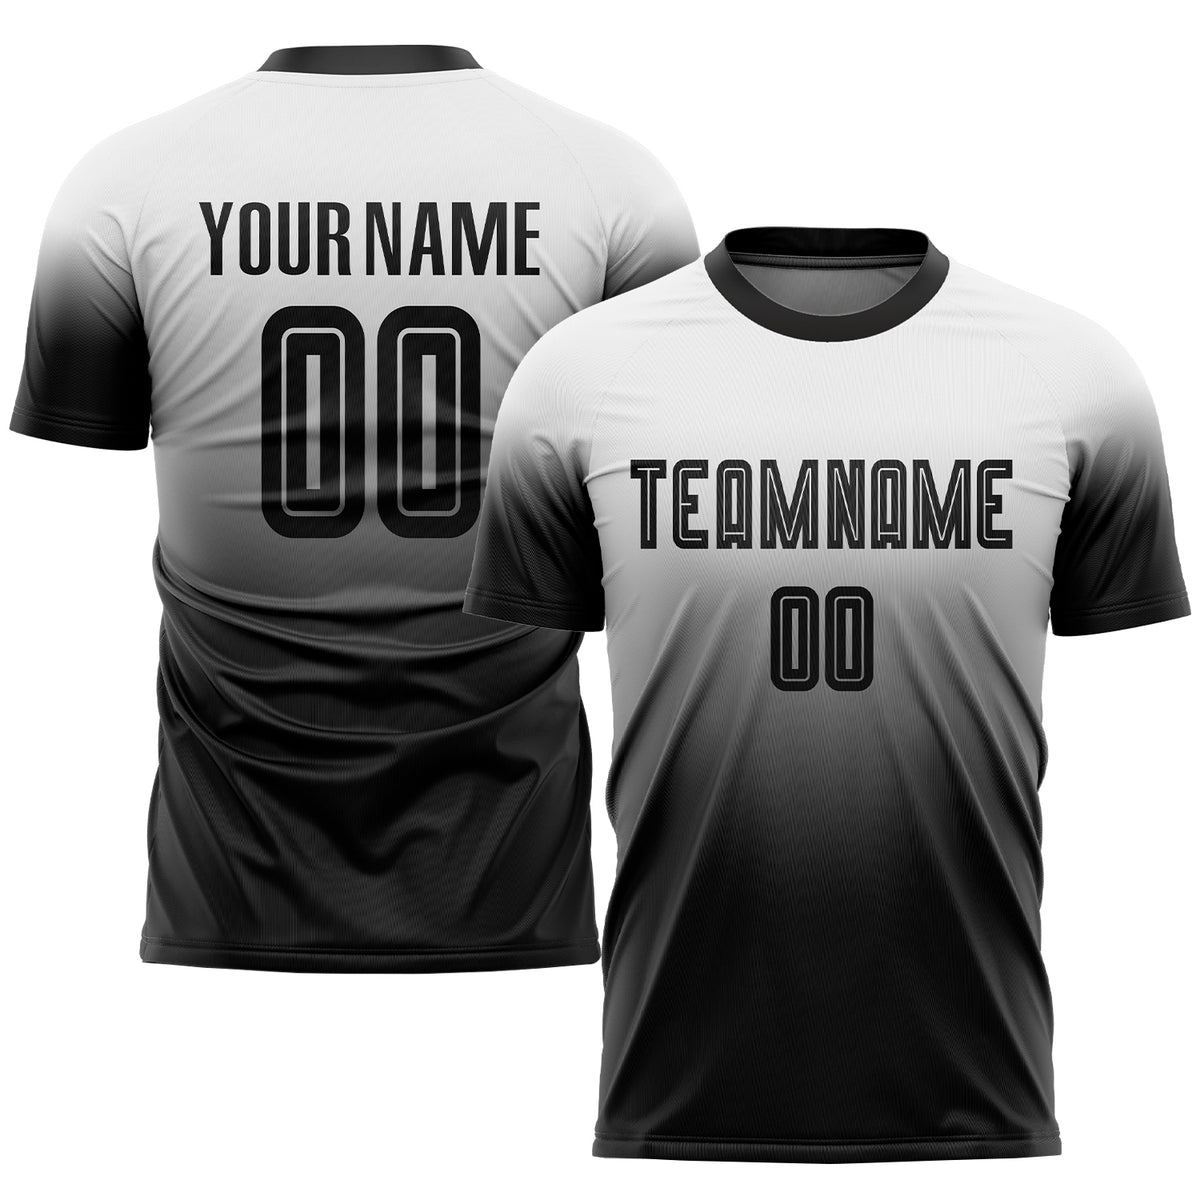 PANTHERS 01 YELLOW TERNO BASKETBALL JERSEY FREE CUSTOMIZE OF NAME & NUMBER  ONLY full sublimation high quality fabrics/ new trend jersey